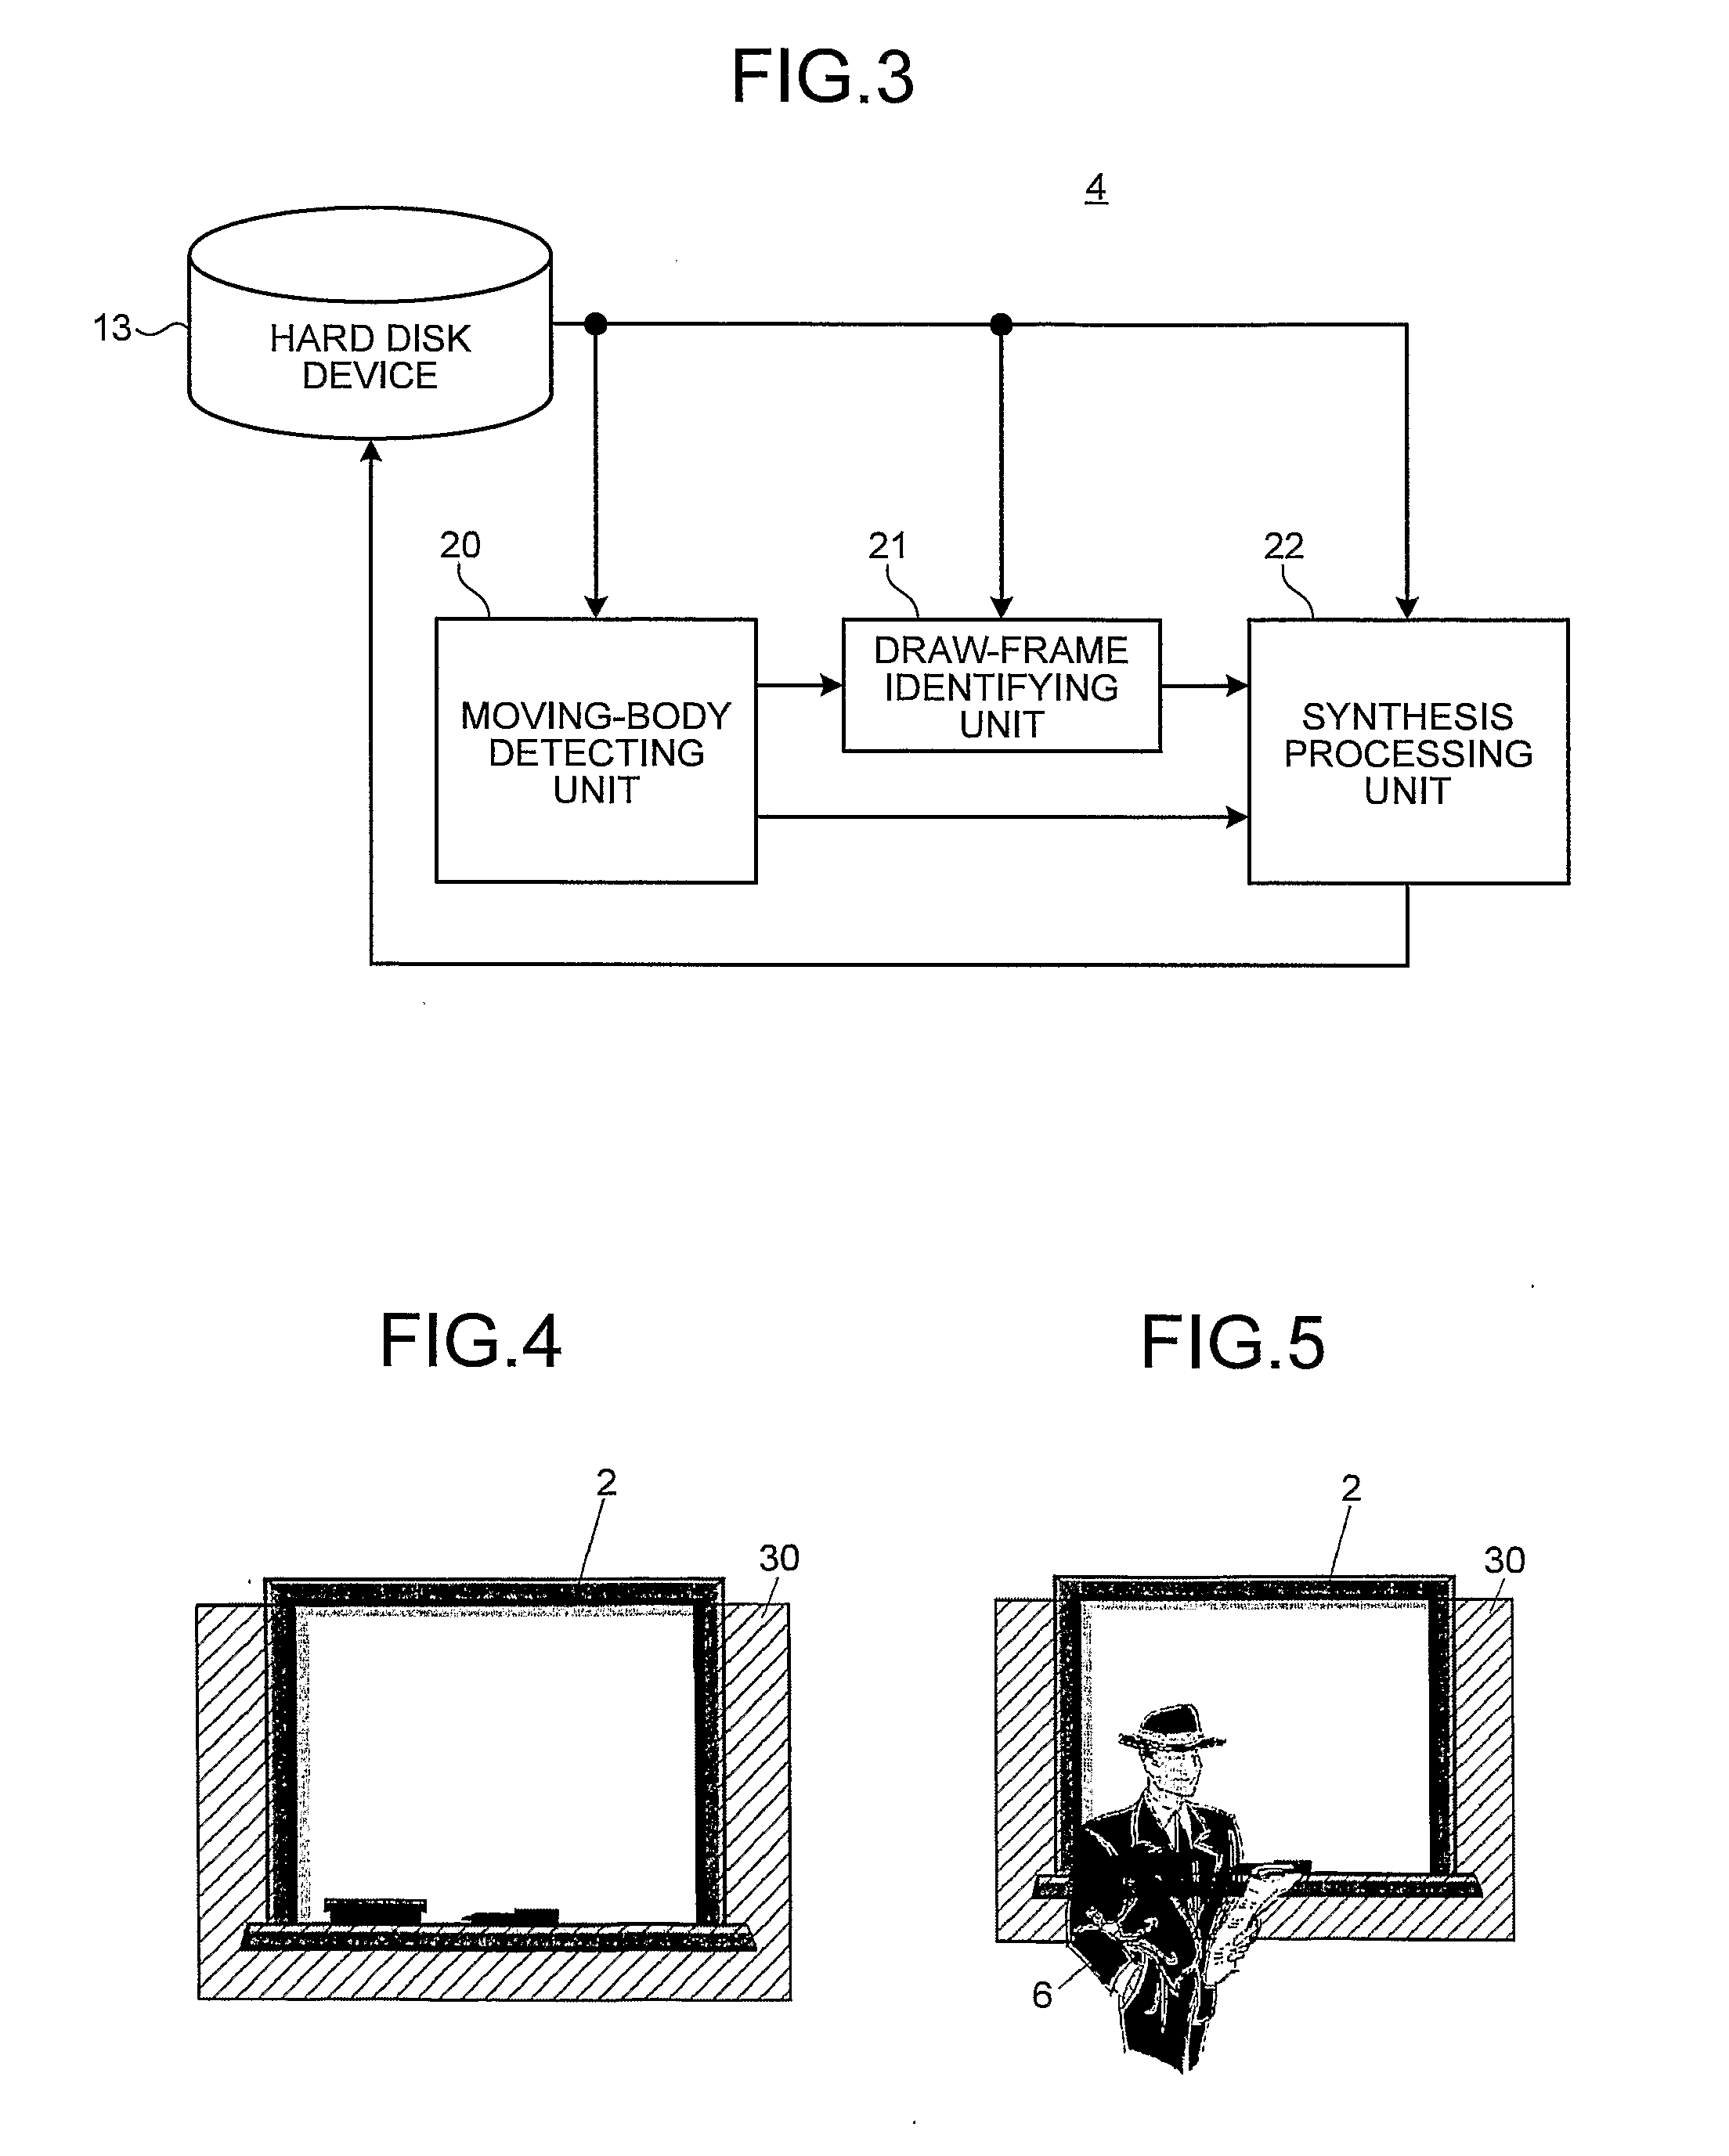 Video editing device and video editing system